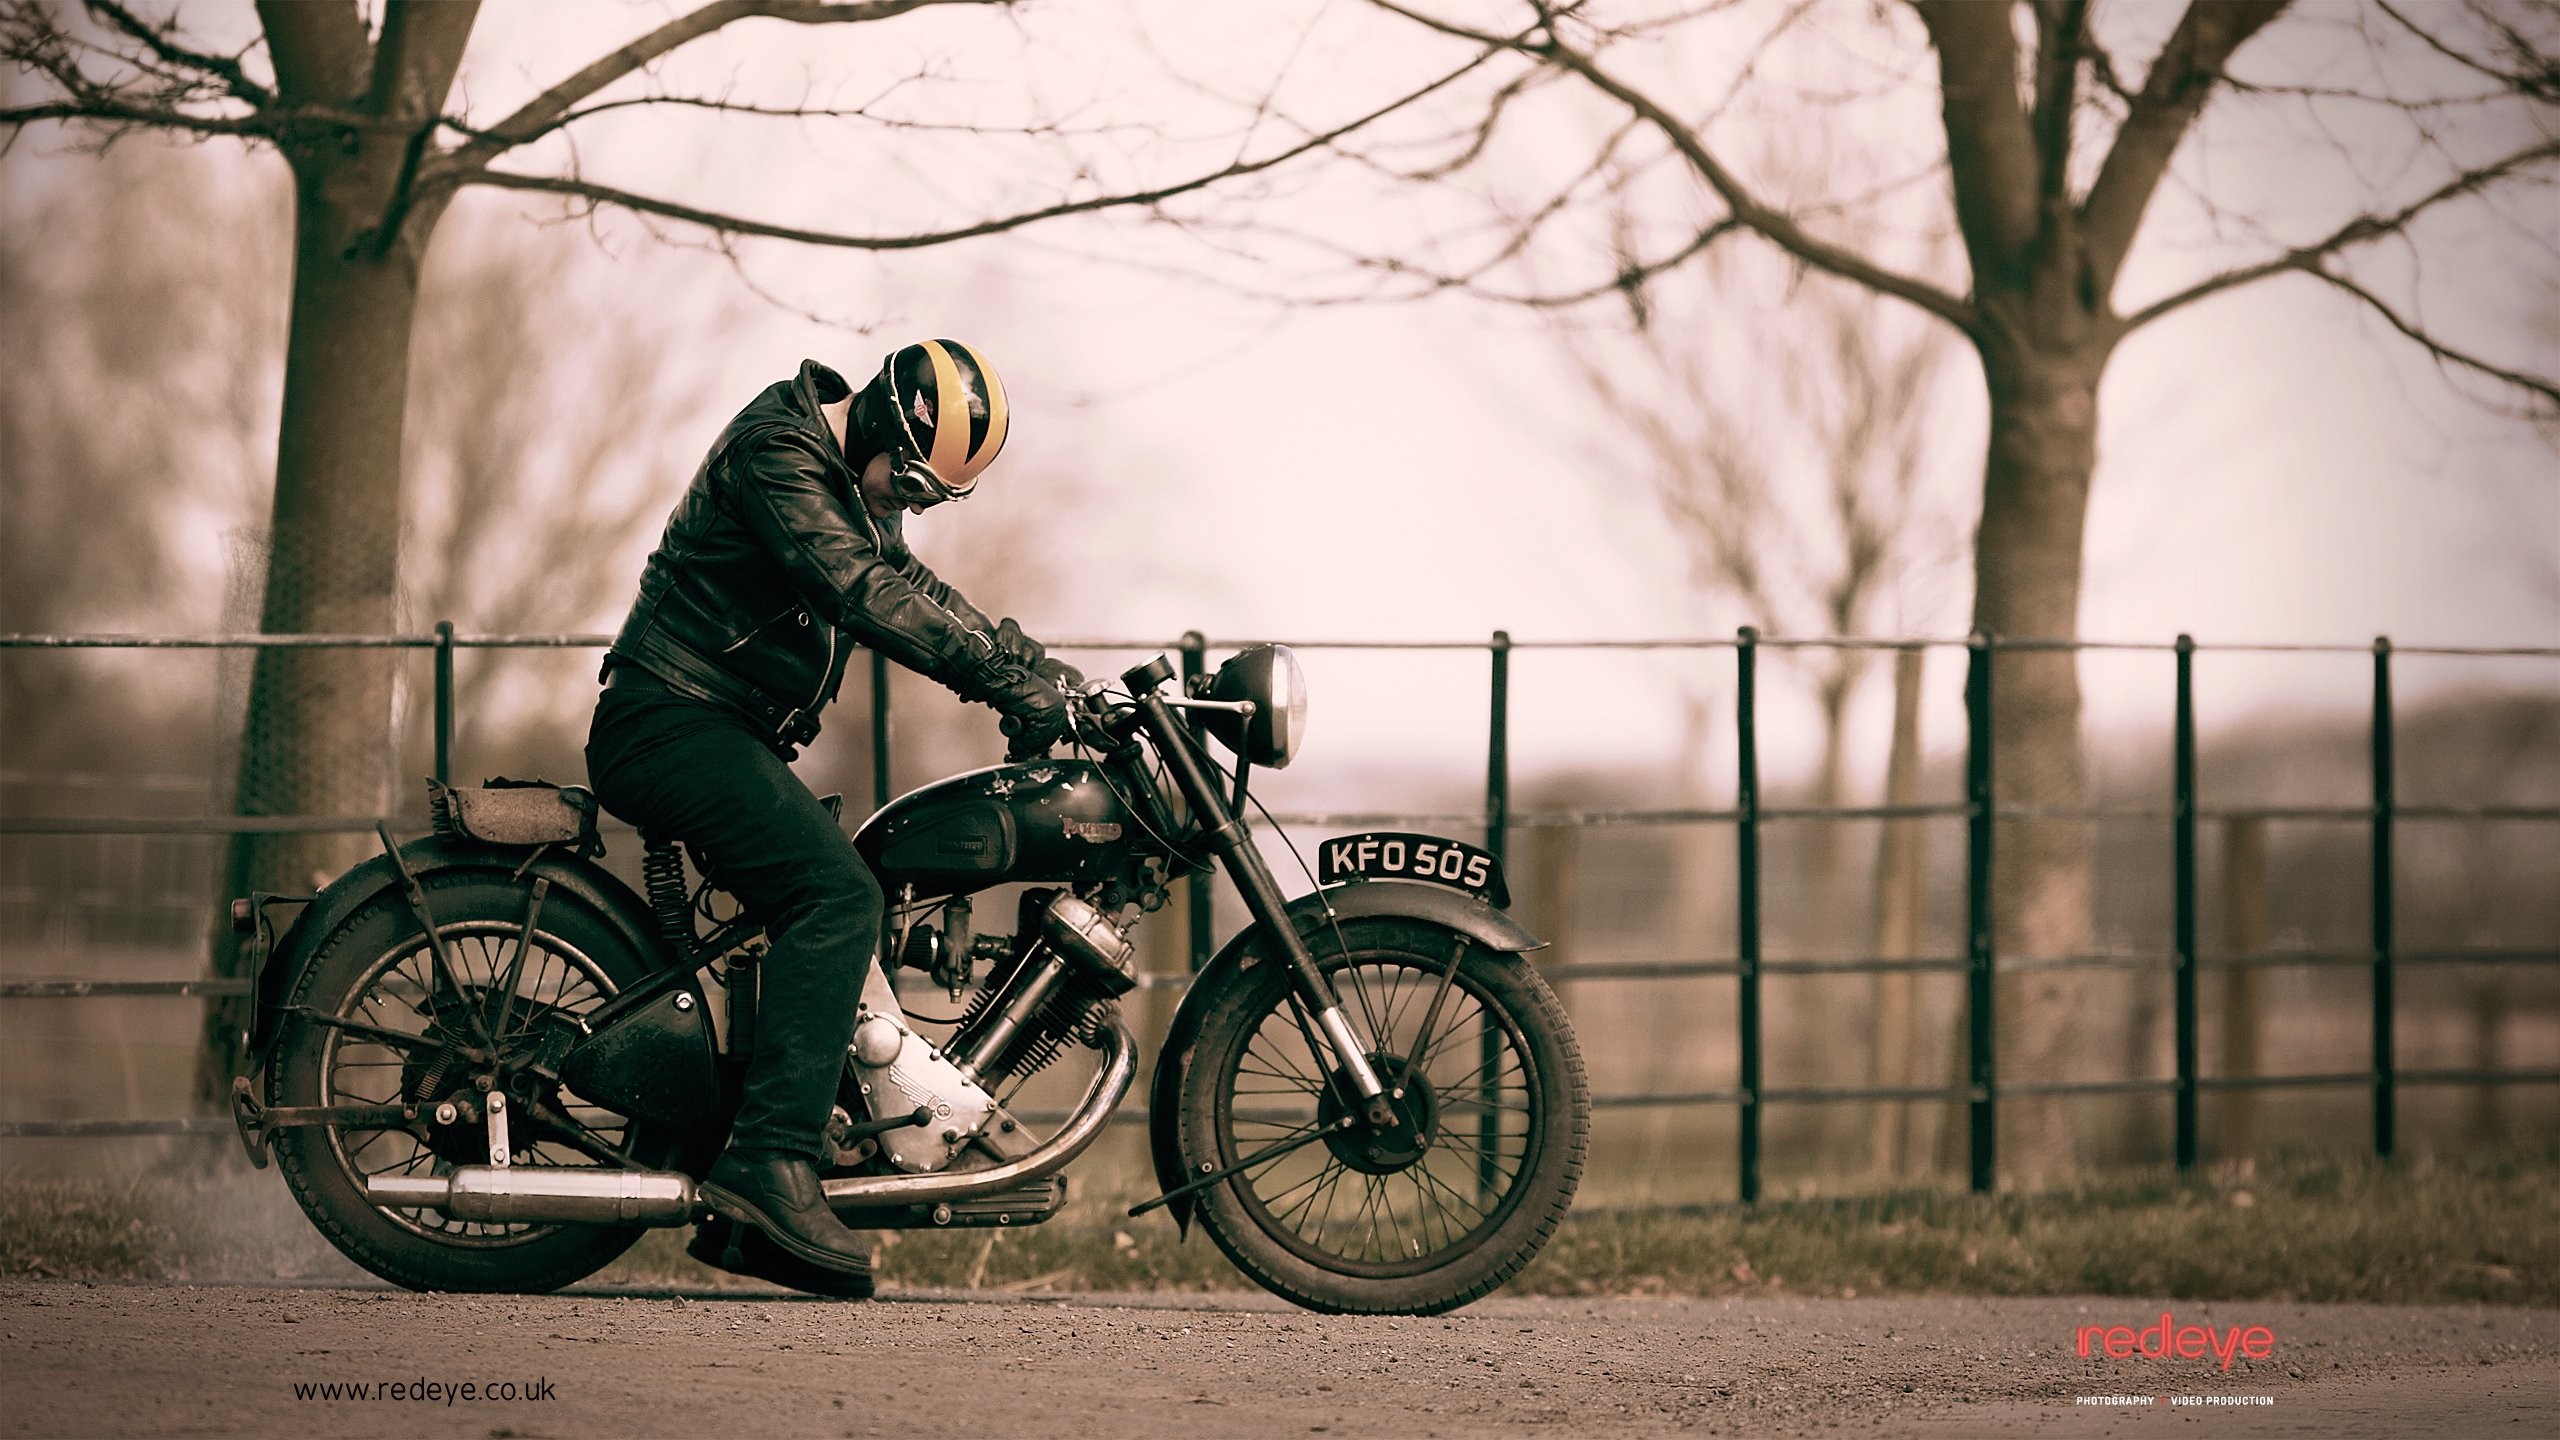 classic motorcycle wallpaper Vintage motorcycle wallpaper (66+ images)